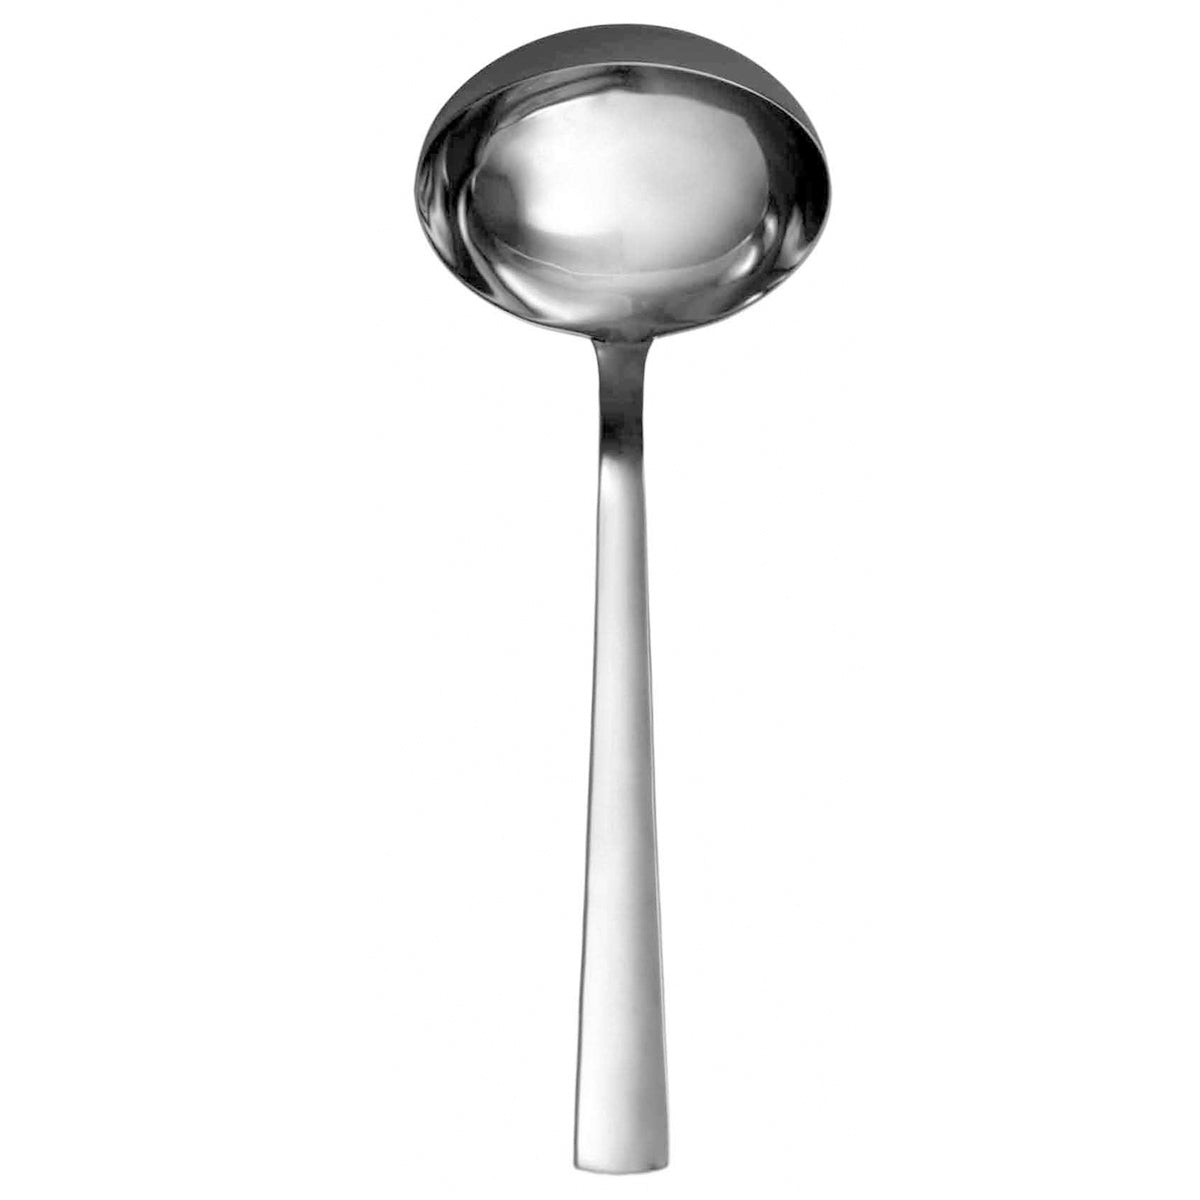 TYPE GOUTTE MIRROR FINISH Cooking ladle – DEGRENNE